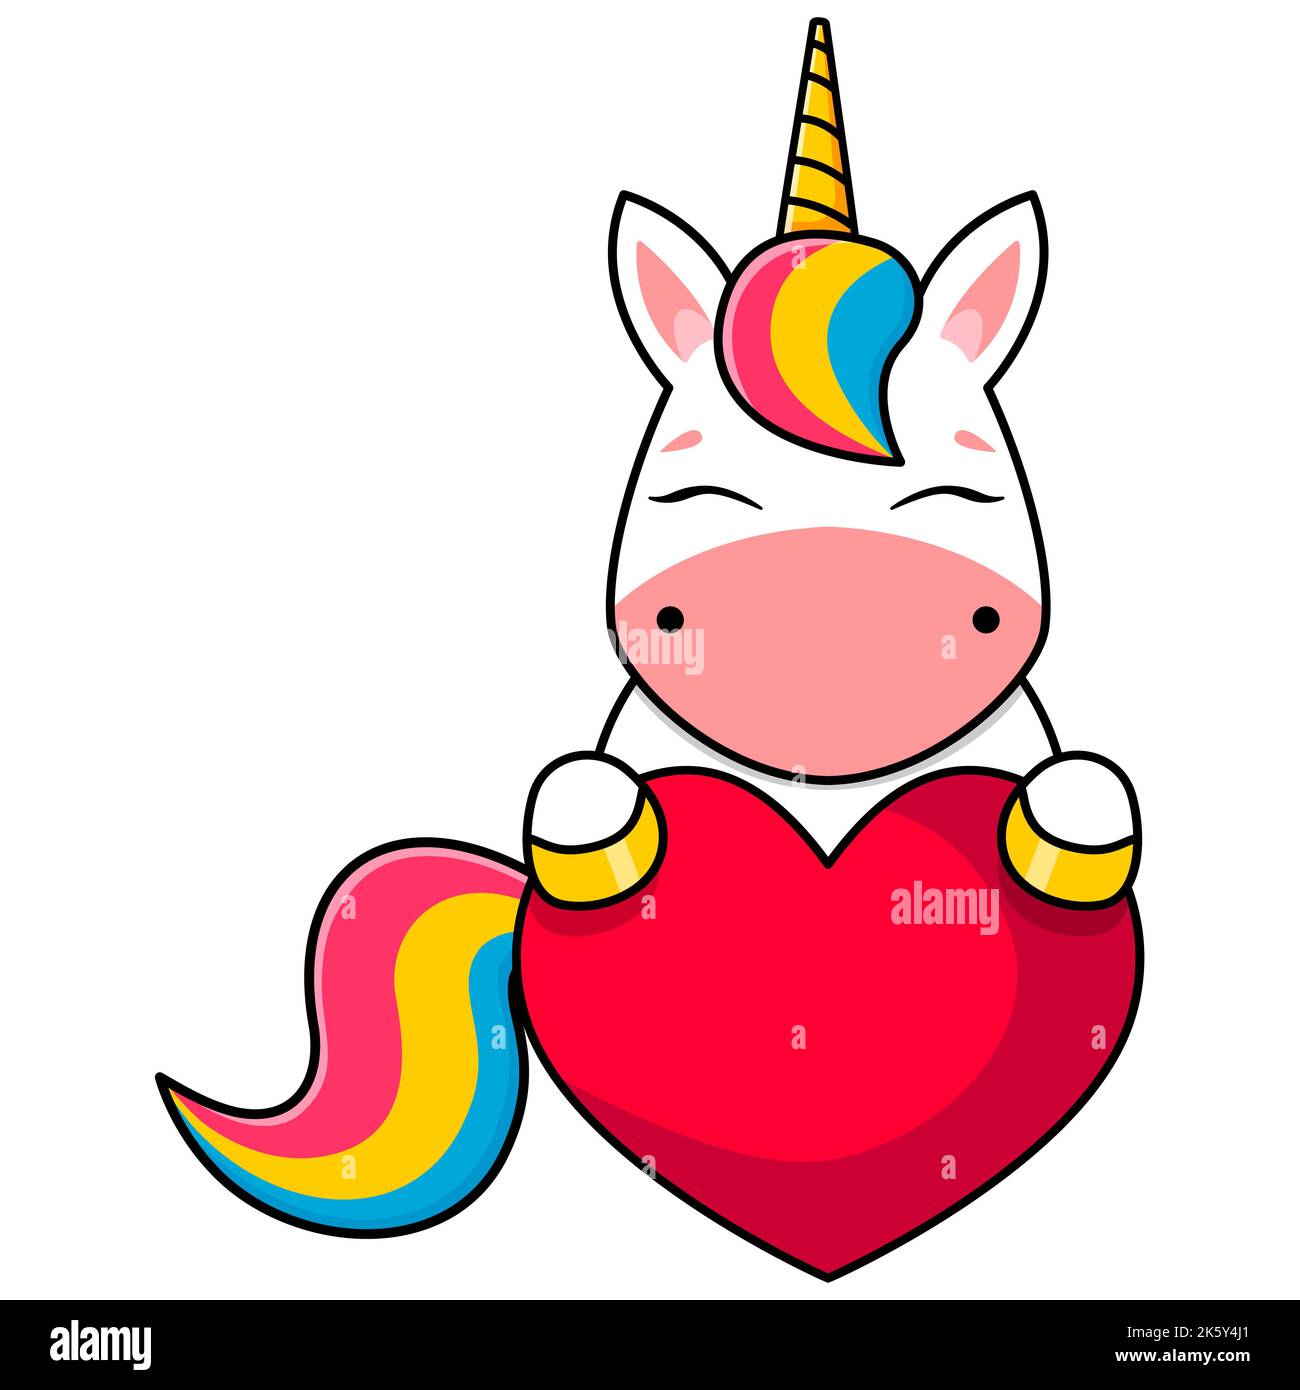 Cute cartoon unicorn sticker. The unicorn is holding a red heart. Baby vector illustration. Stock Vector